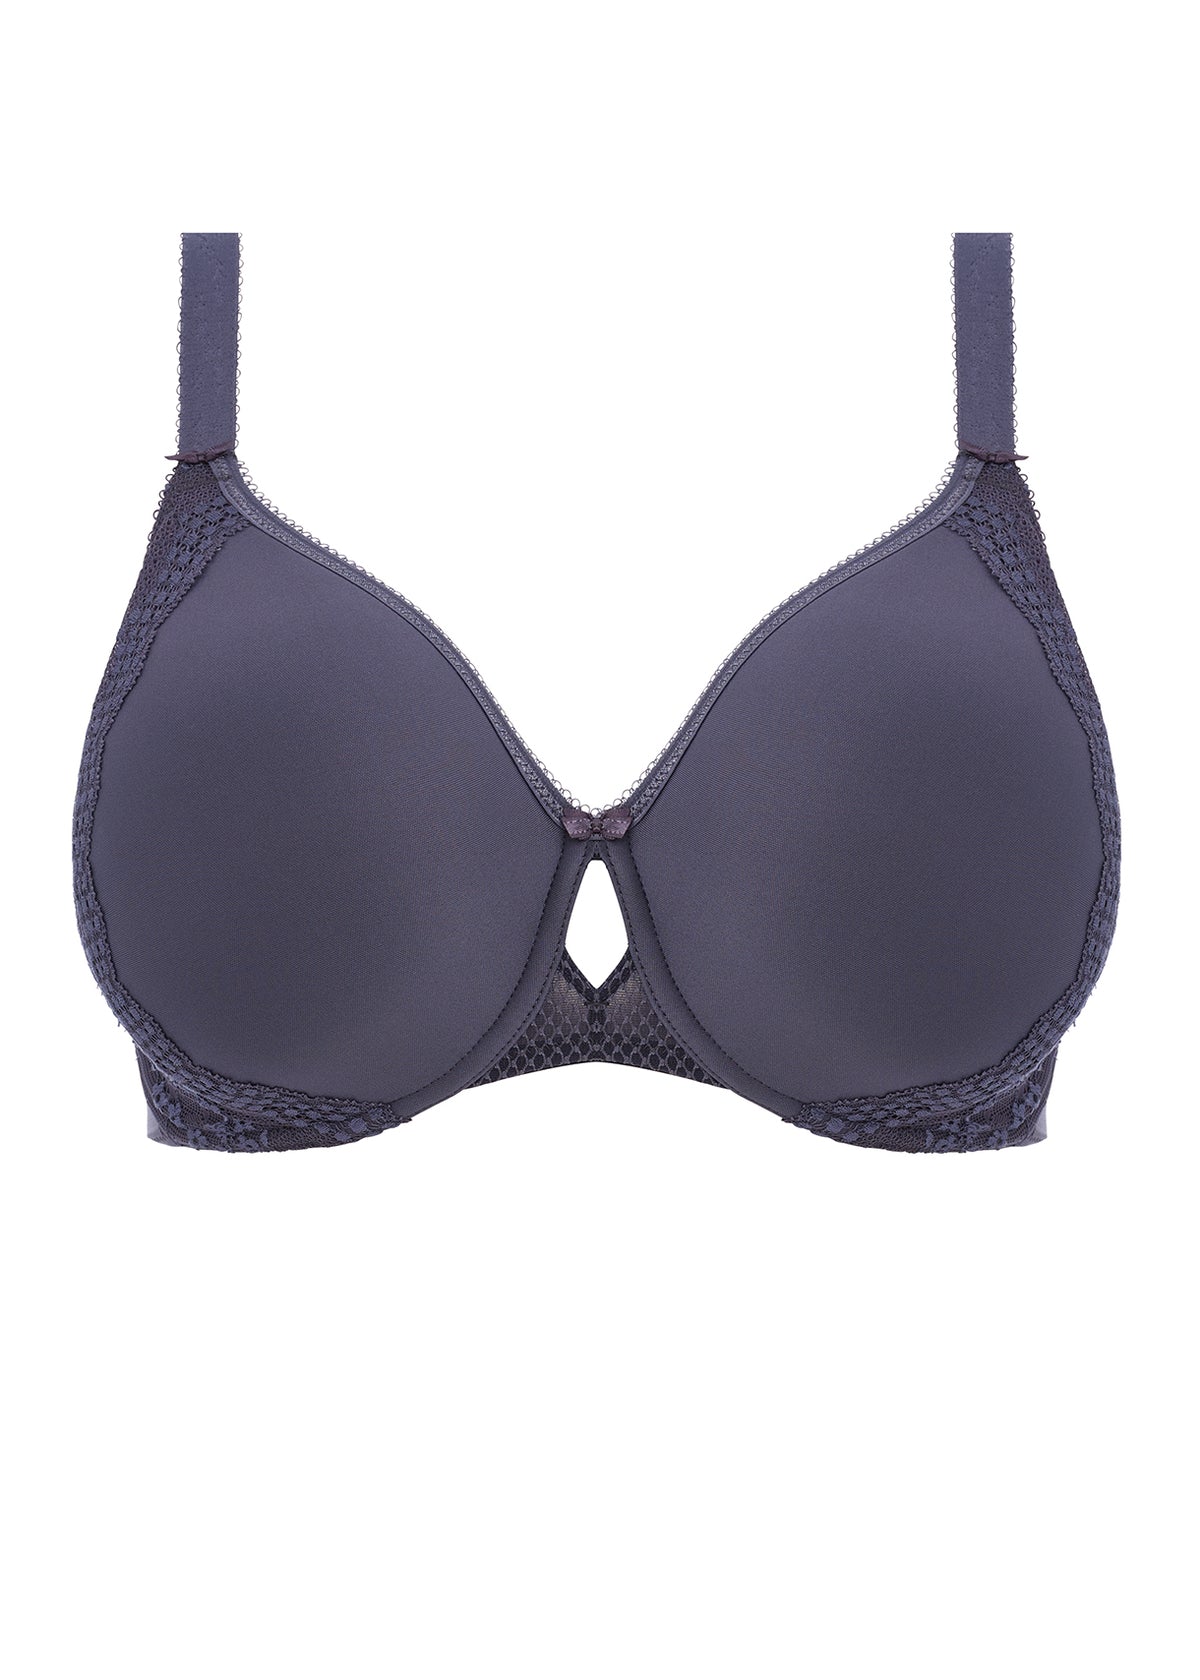 ELOMI CHARLEY BANDLESS SPACER BRA - STORM – Tops & Bottoms